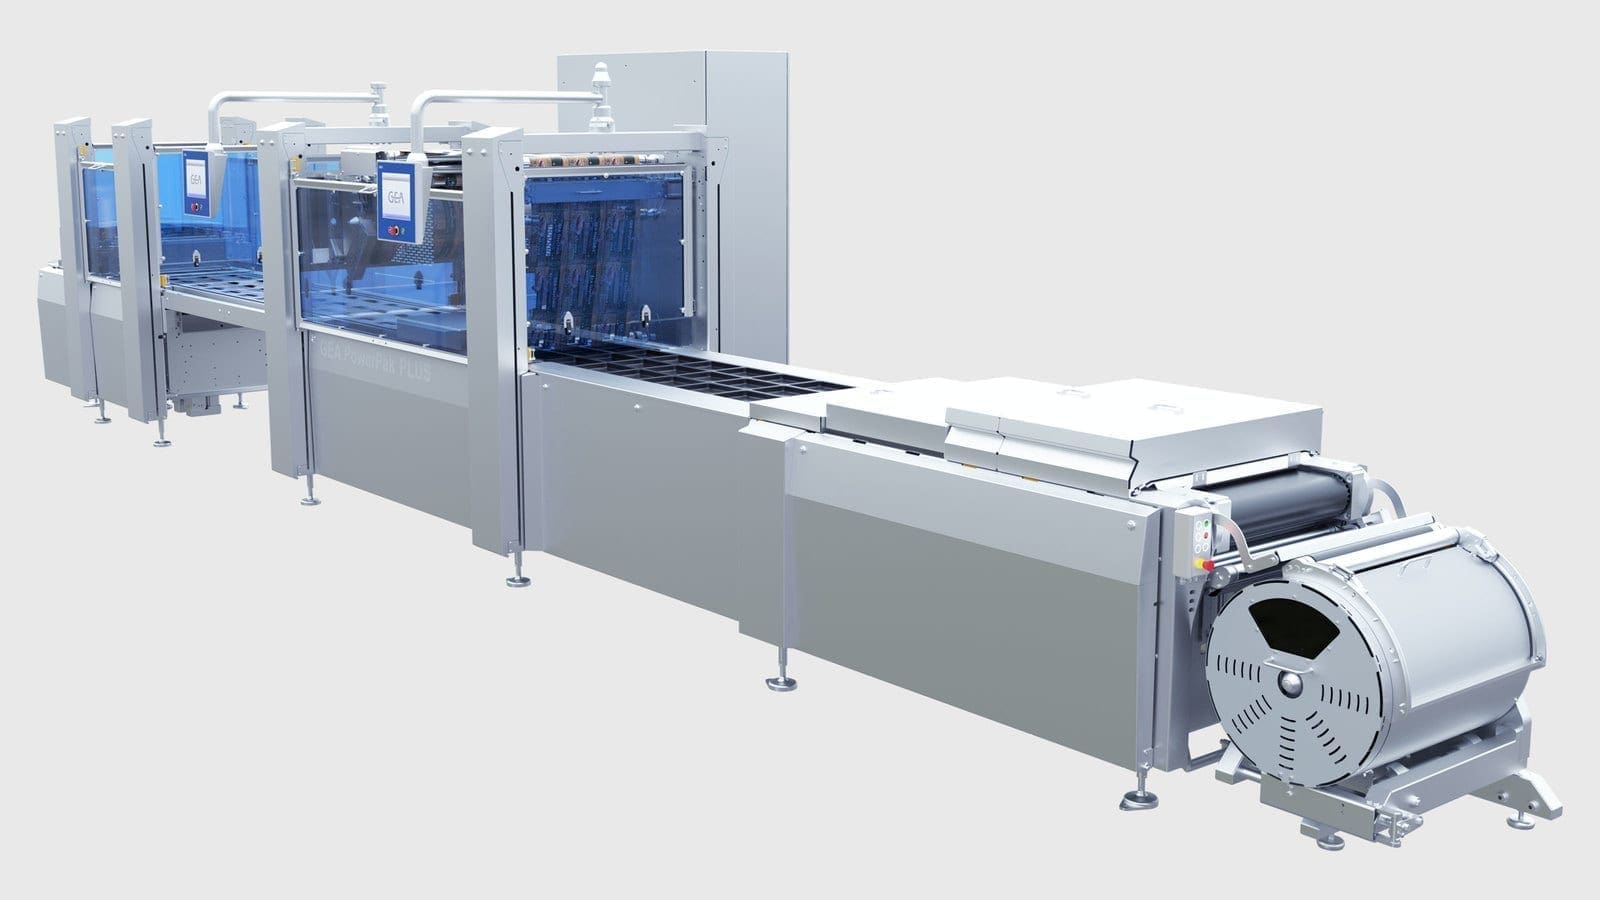 GEA introduces new thermoforming packaging machine that enables use of paper-based packaging alternatives